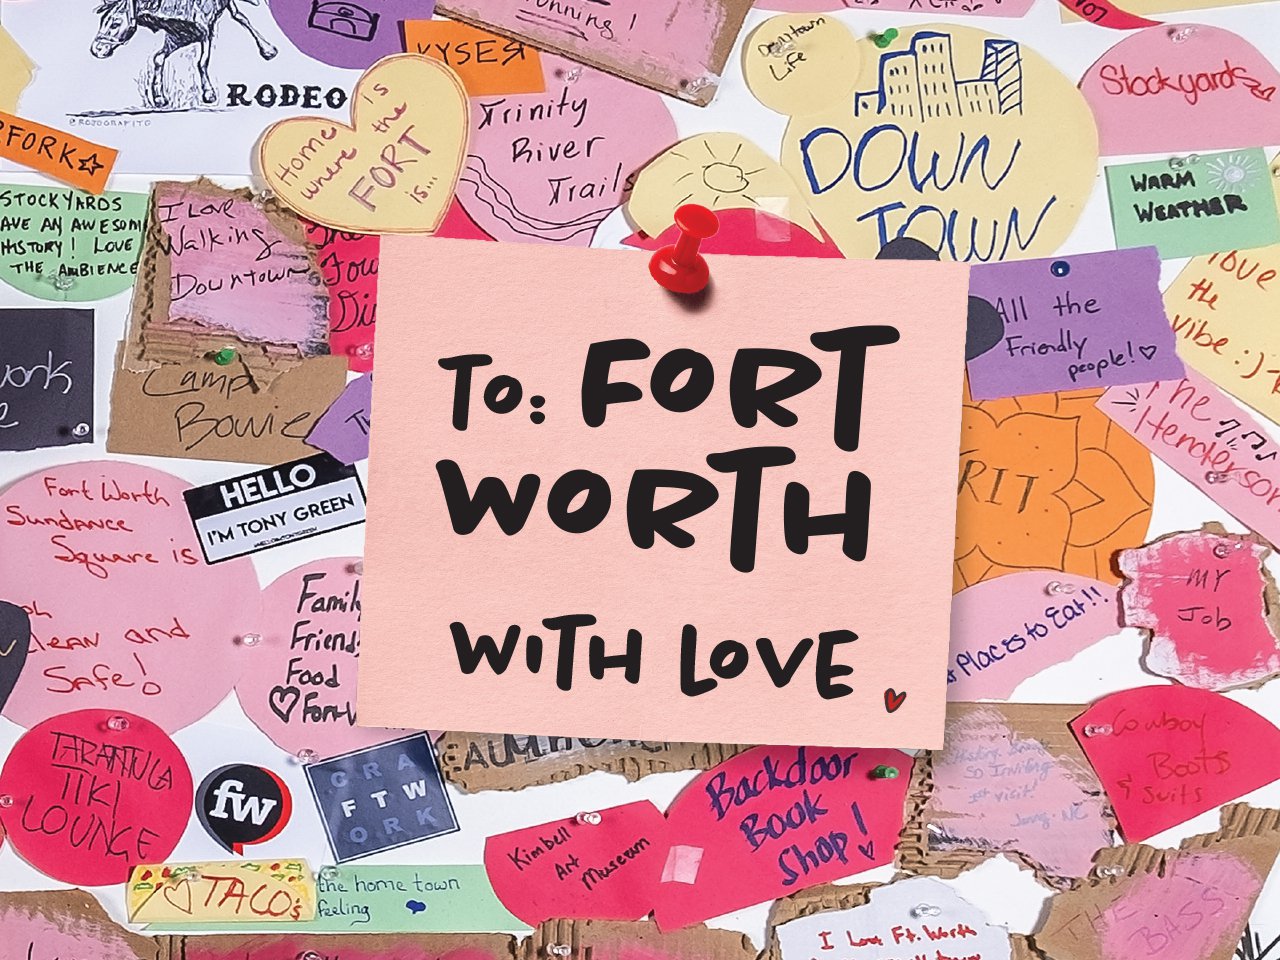 Love Letters To Fort Worth Fort Worth Magazine